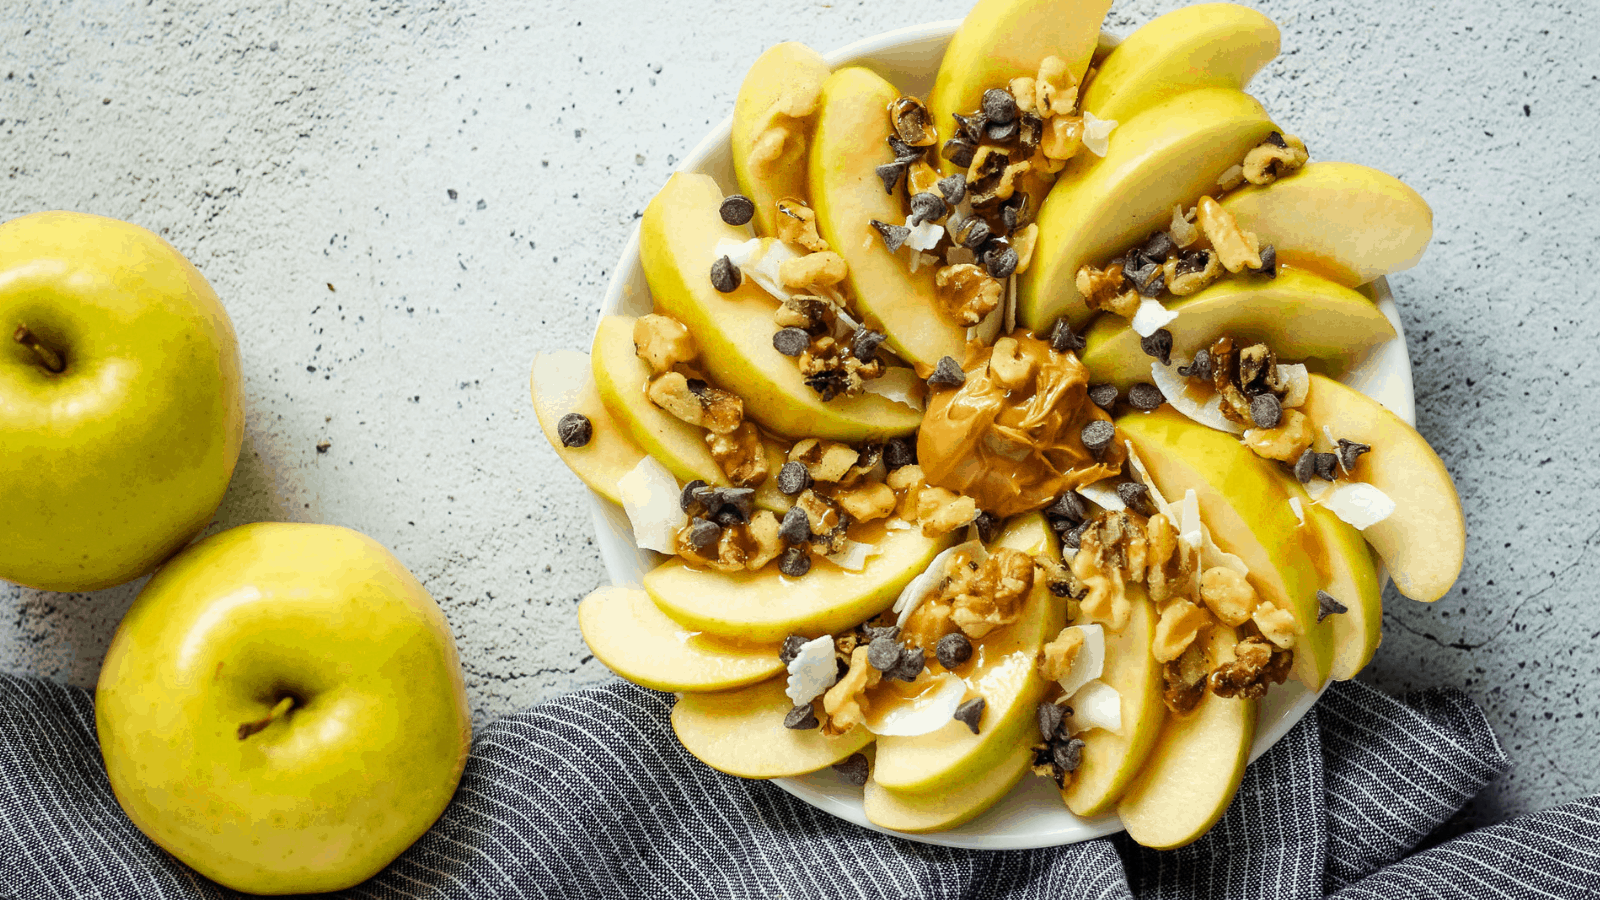 Simple Snacks for Athletes | Learn how to properly fuel your workouts and nourish your body with these spots nutrition tips. Plus, grab an easy recipe for Loaded Apple Nachos